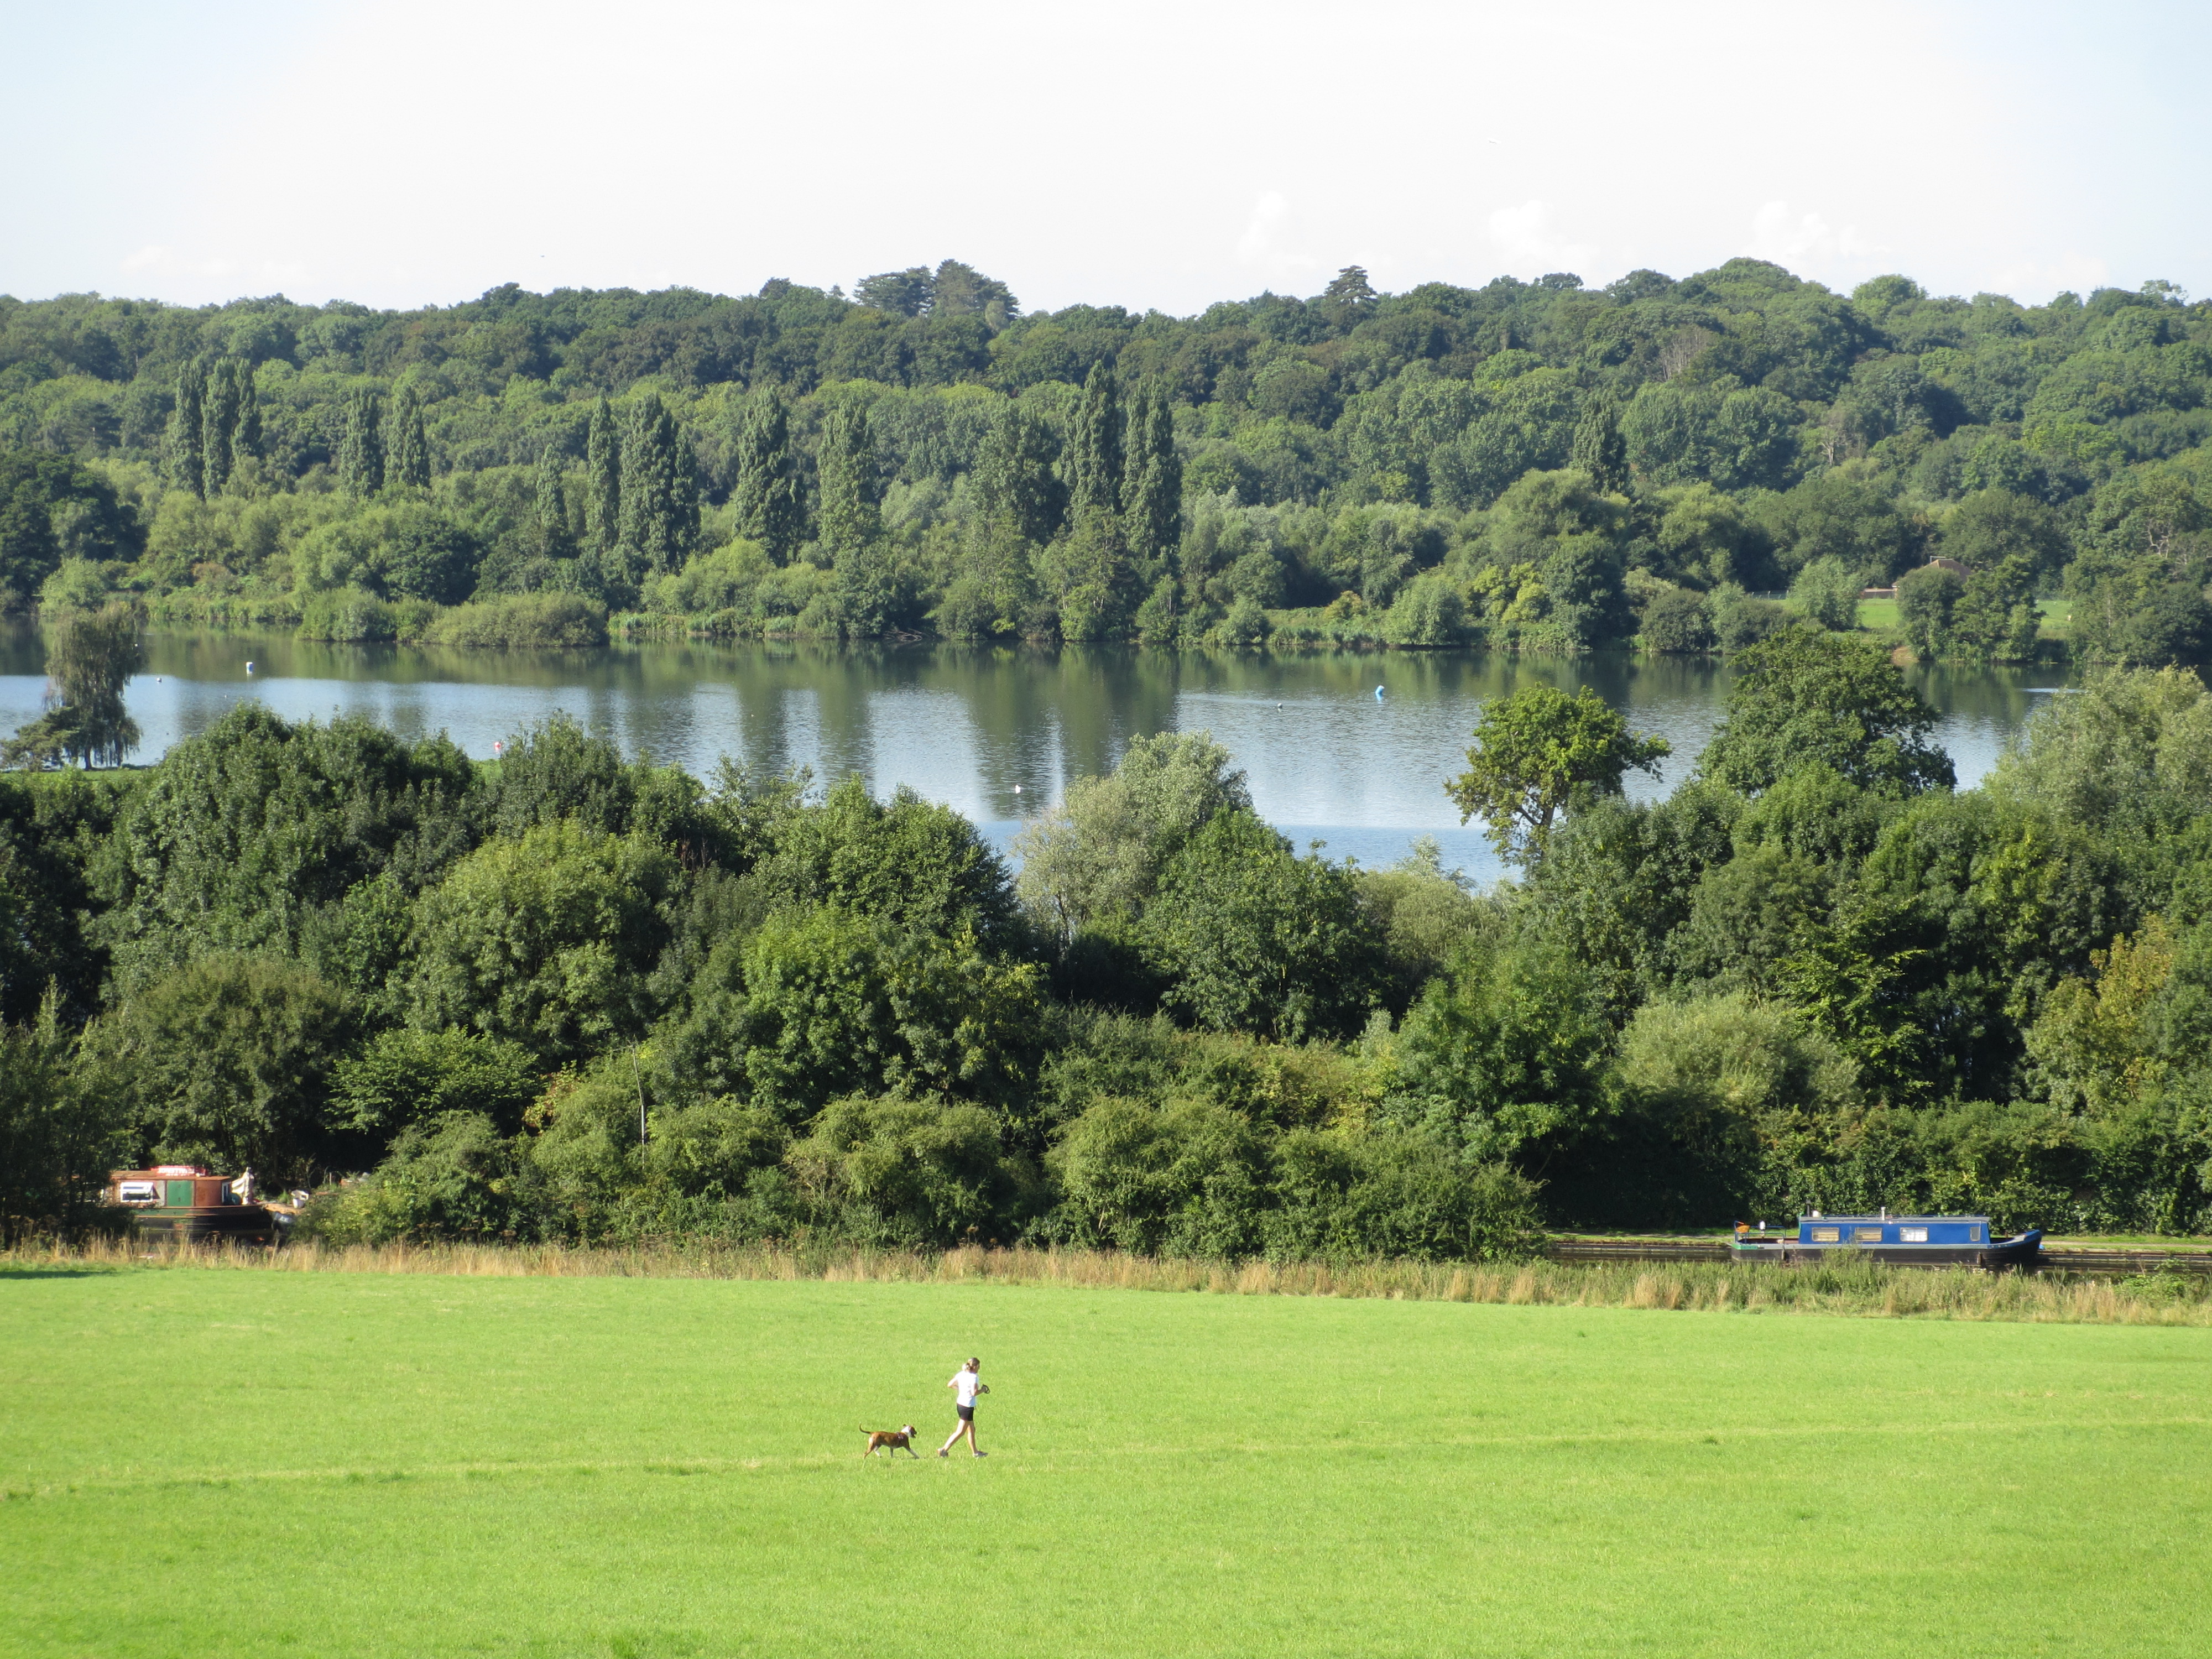 a person walking a dog in a field with trees and a lake